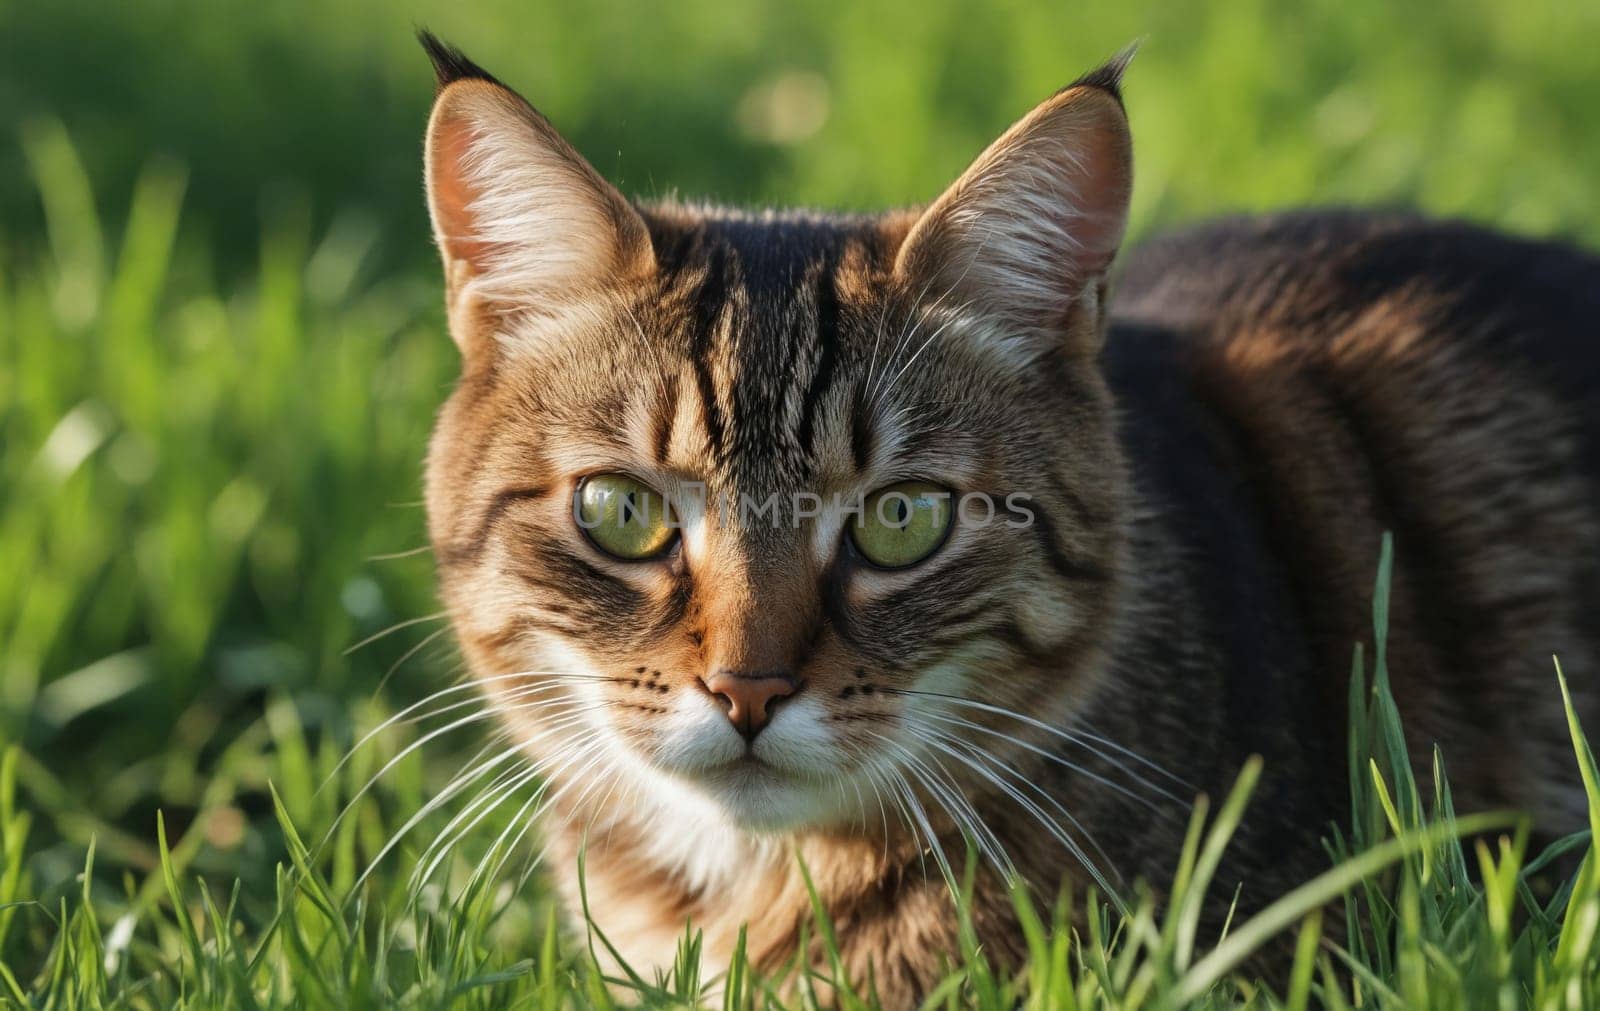 Fawn Felidae with whiskers lies on grass, staring at camera in natural landscape by Andre1ns